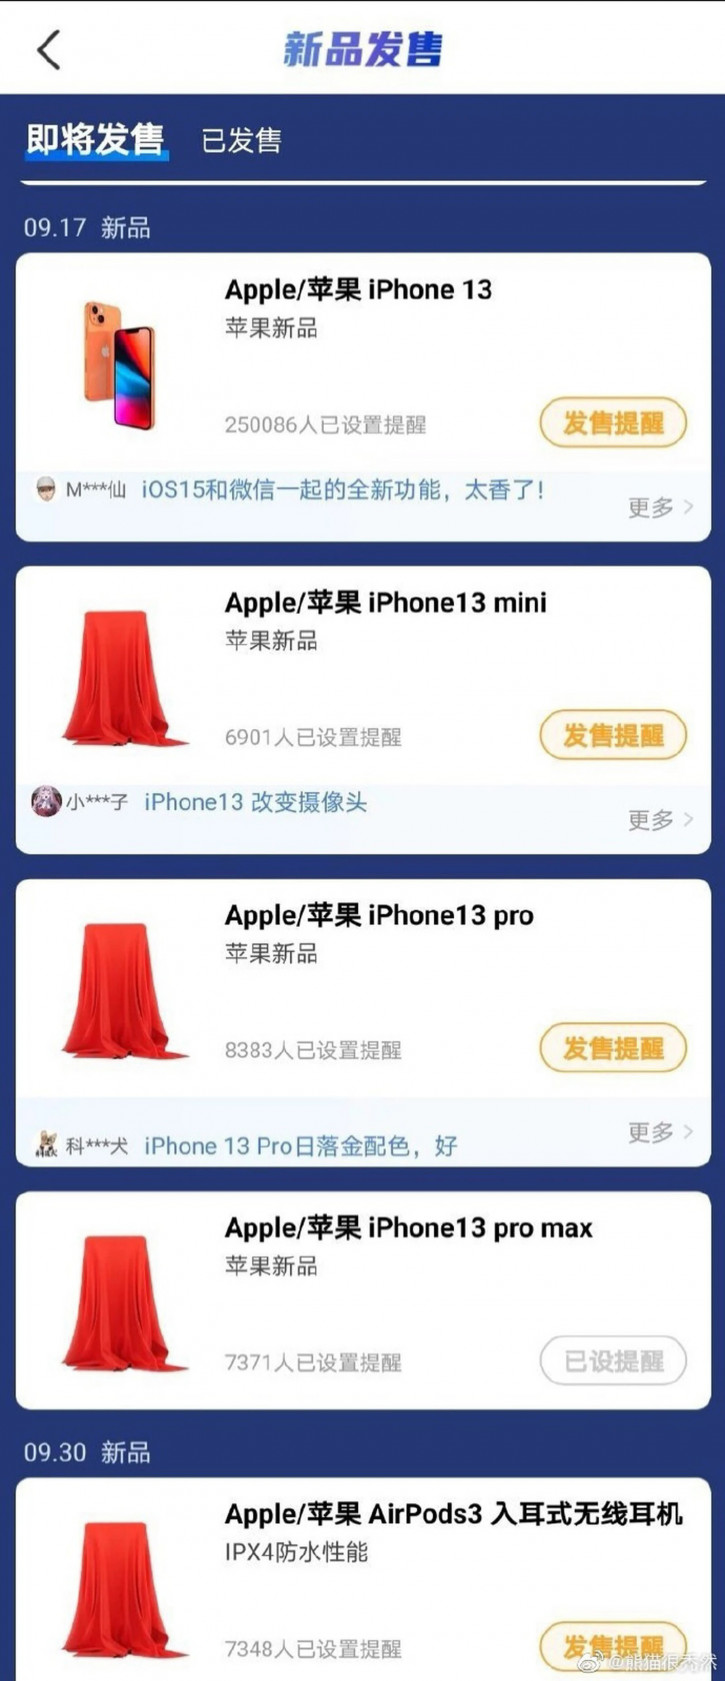   iPhone 12s  AirPods 3, , 